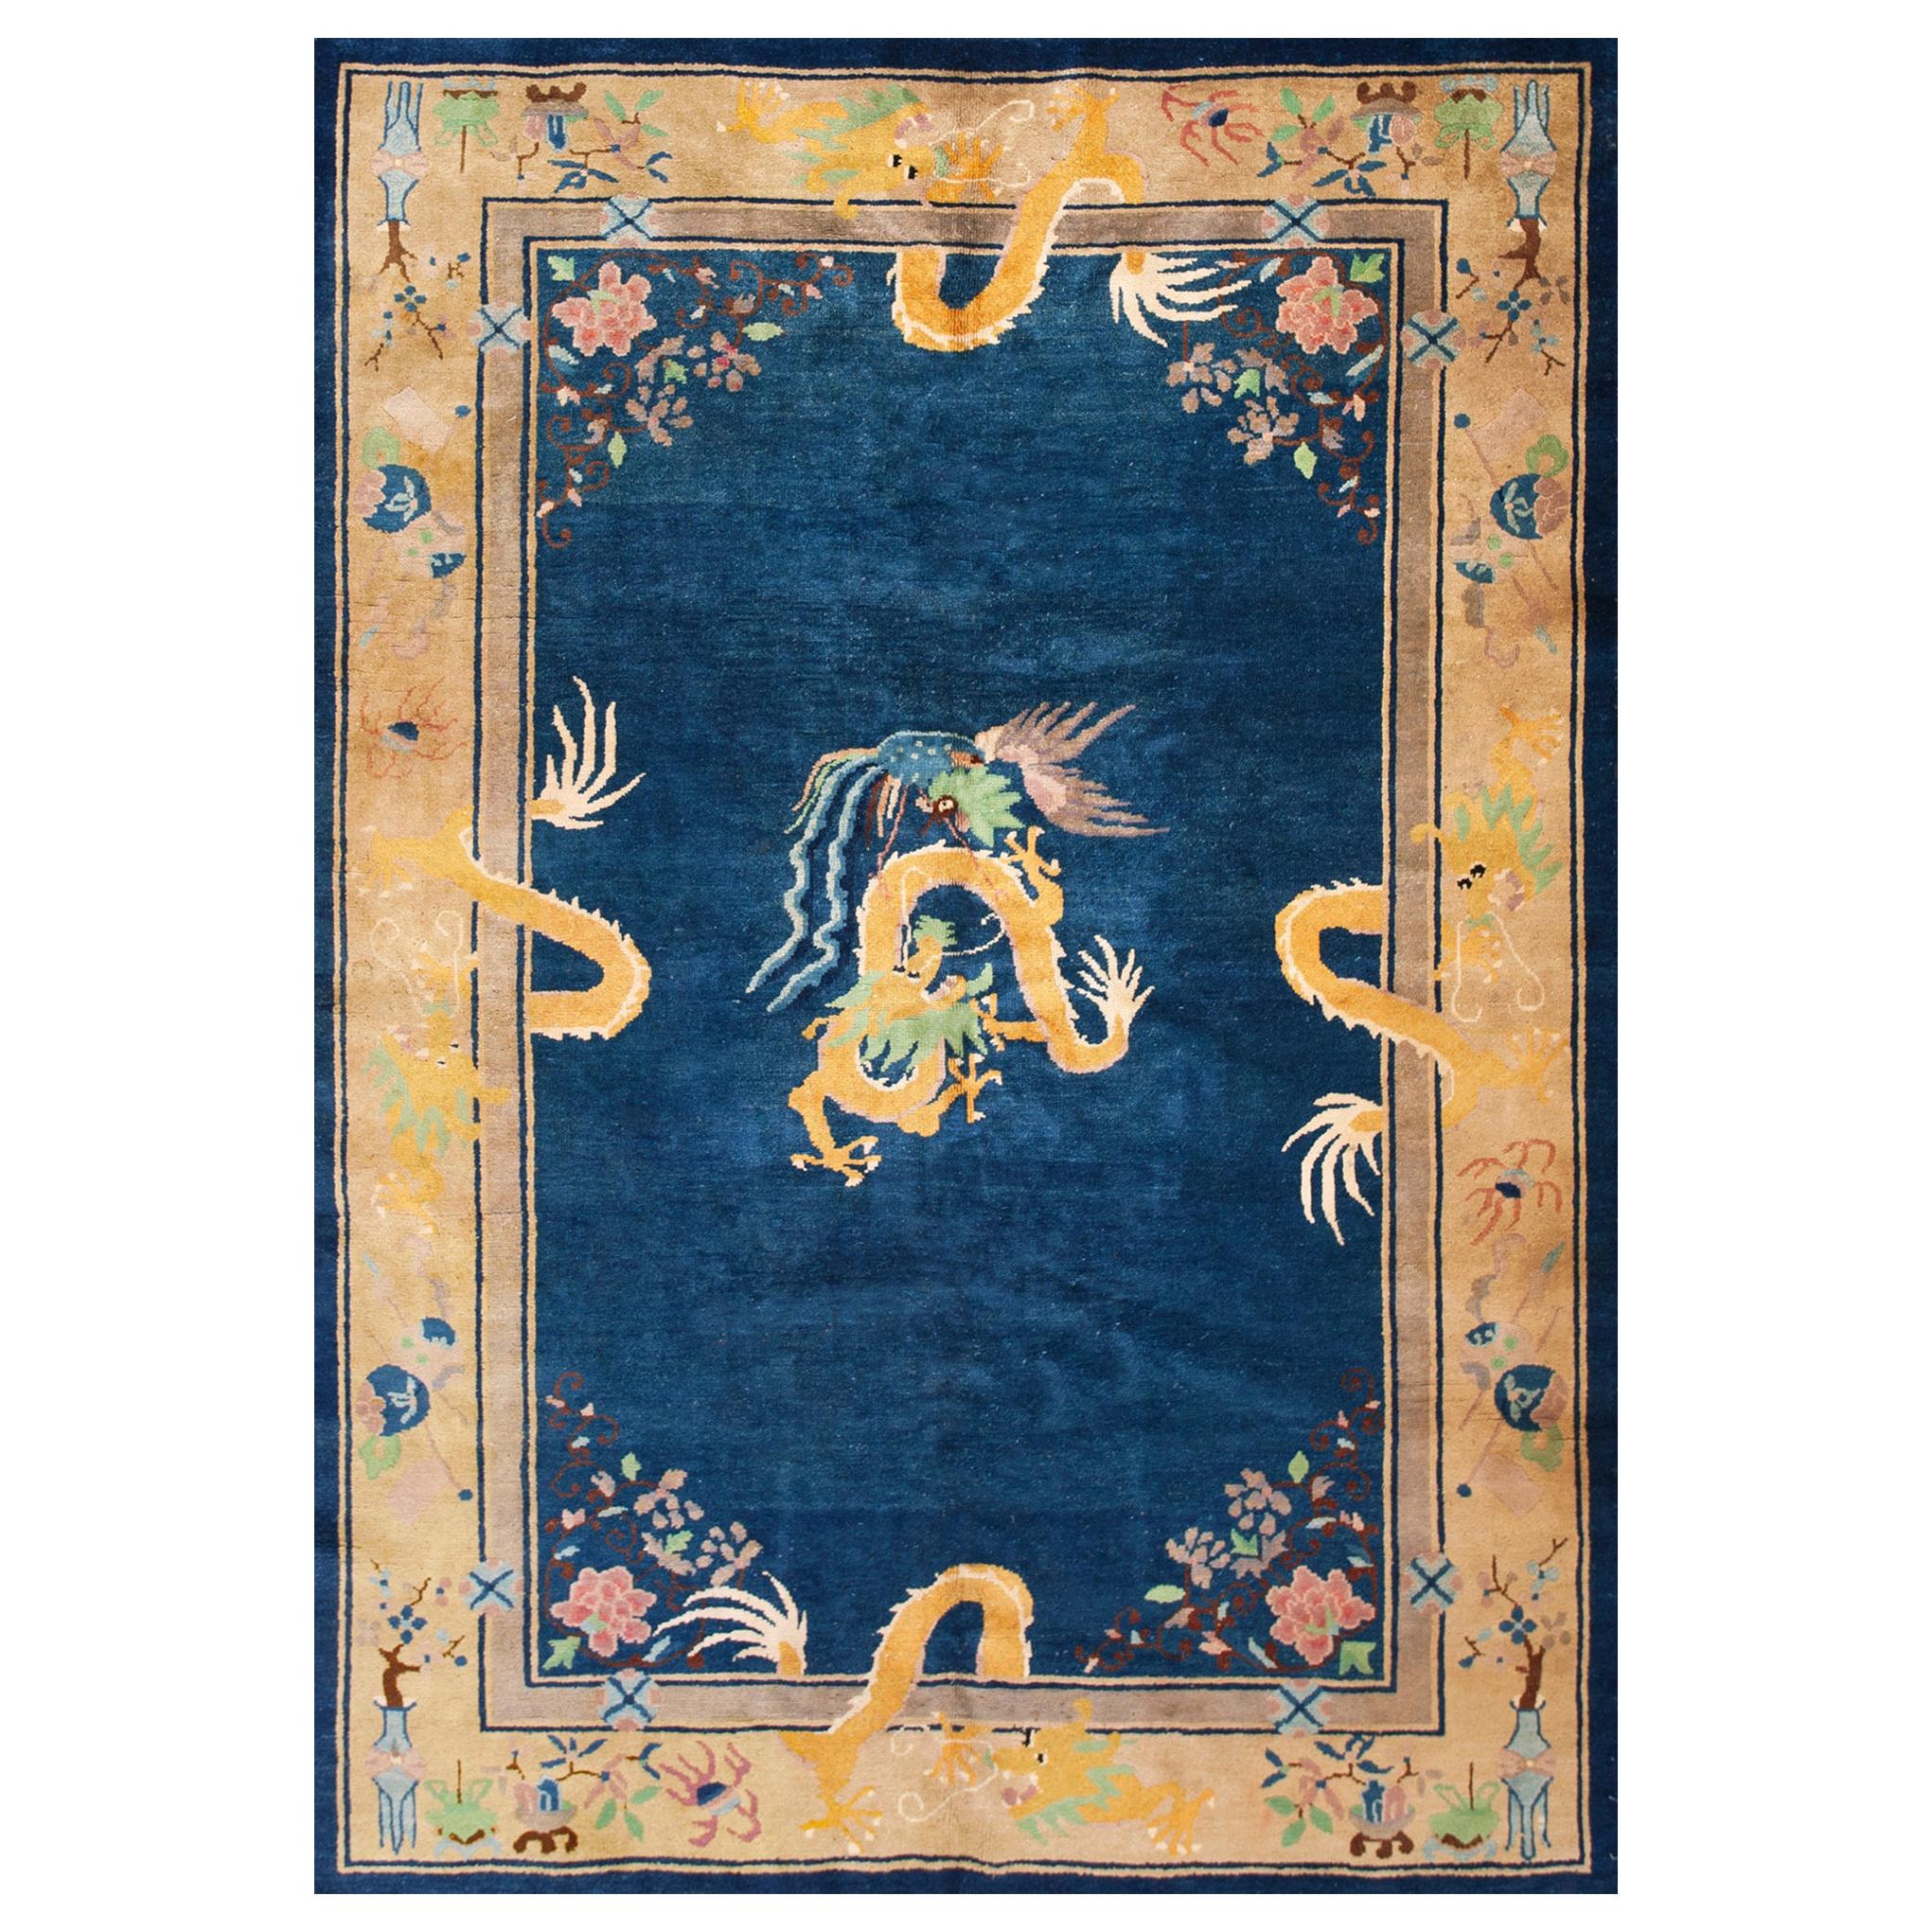 1920s Chinese Art Deco Dragon Carpet ( 6' x 8'6" - 183 x 259 ) For Sale